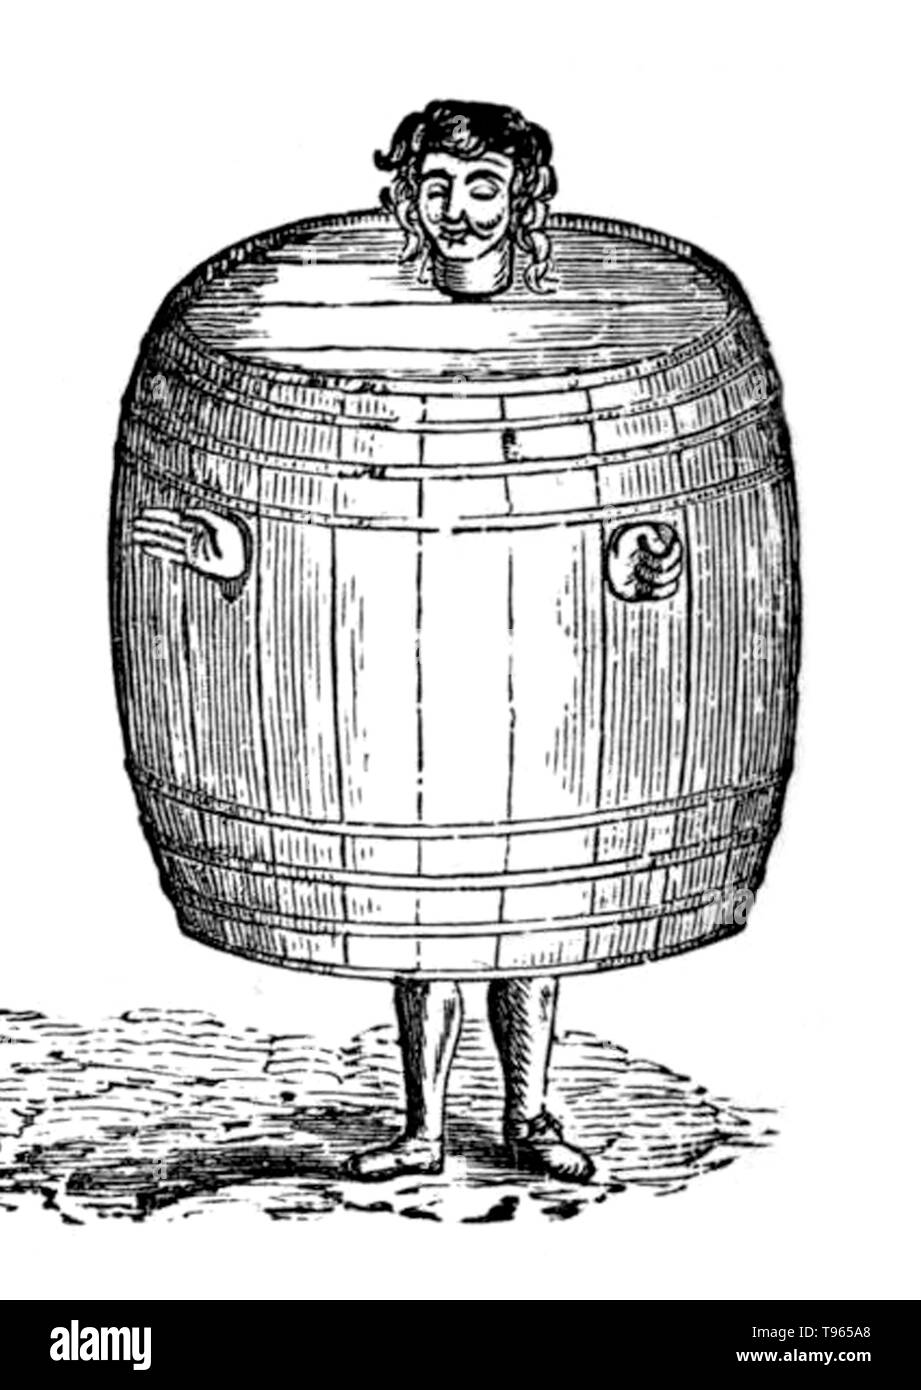 A Drunkard's cloak was a type of pillory used in various jurisdictions to punish miscreants. The drunkard's cloak was actually a barrel, into the top of which a hole was made for the head to pass through. Two smaller holes in the sides were cut for the arms. Once suitably attired, the miscreant was paraded through the town, effectively pilloried. Drunkenness was first made a civil offense in England by the Ale Houses Act 1551, or 'An Act for Keepers of Ale-houses to be bound by Recognisances'. Stock Photo